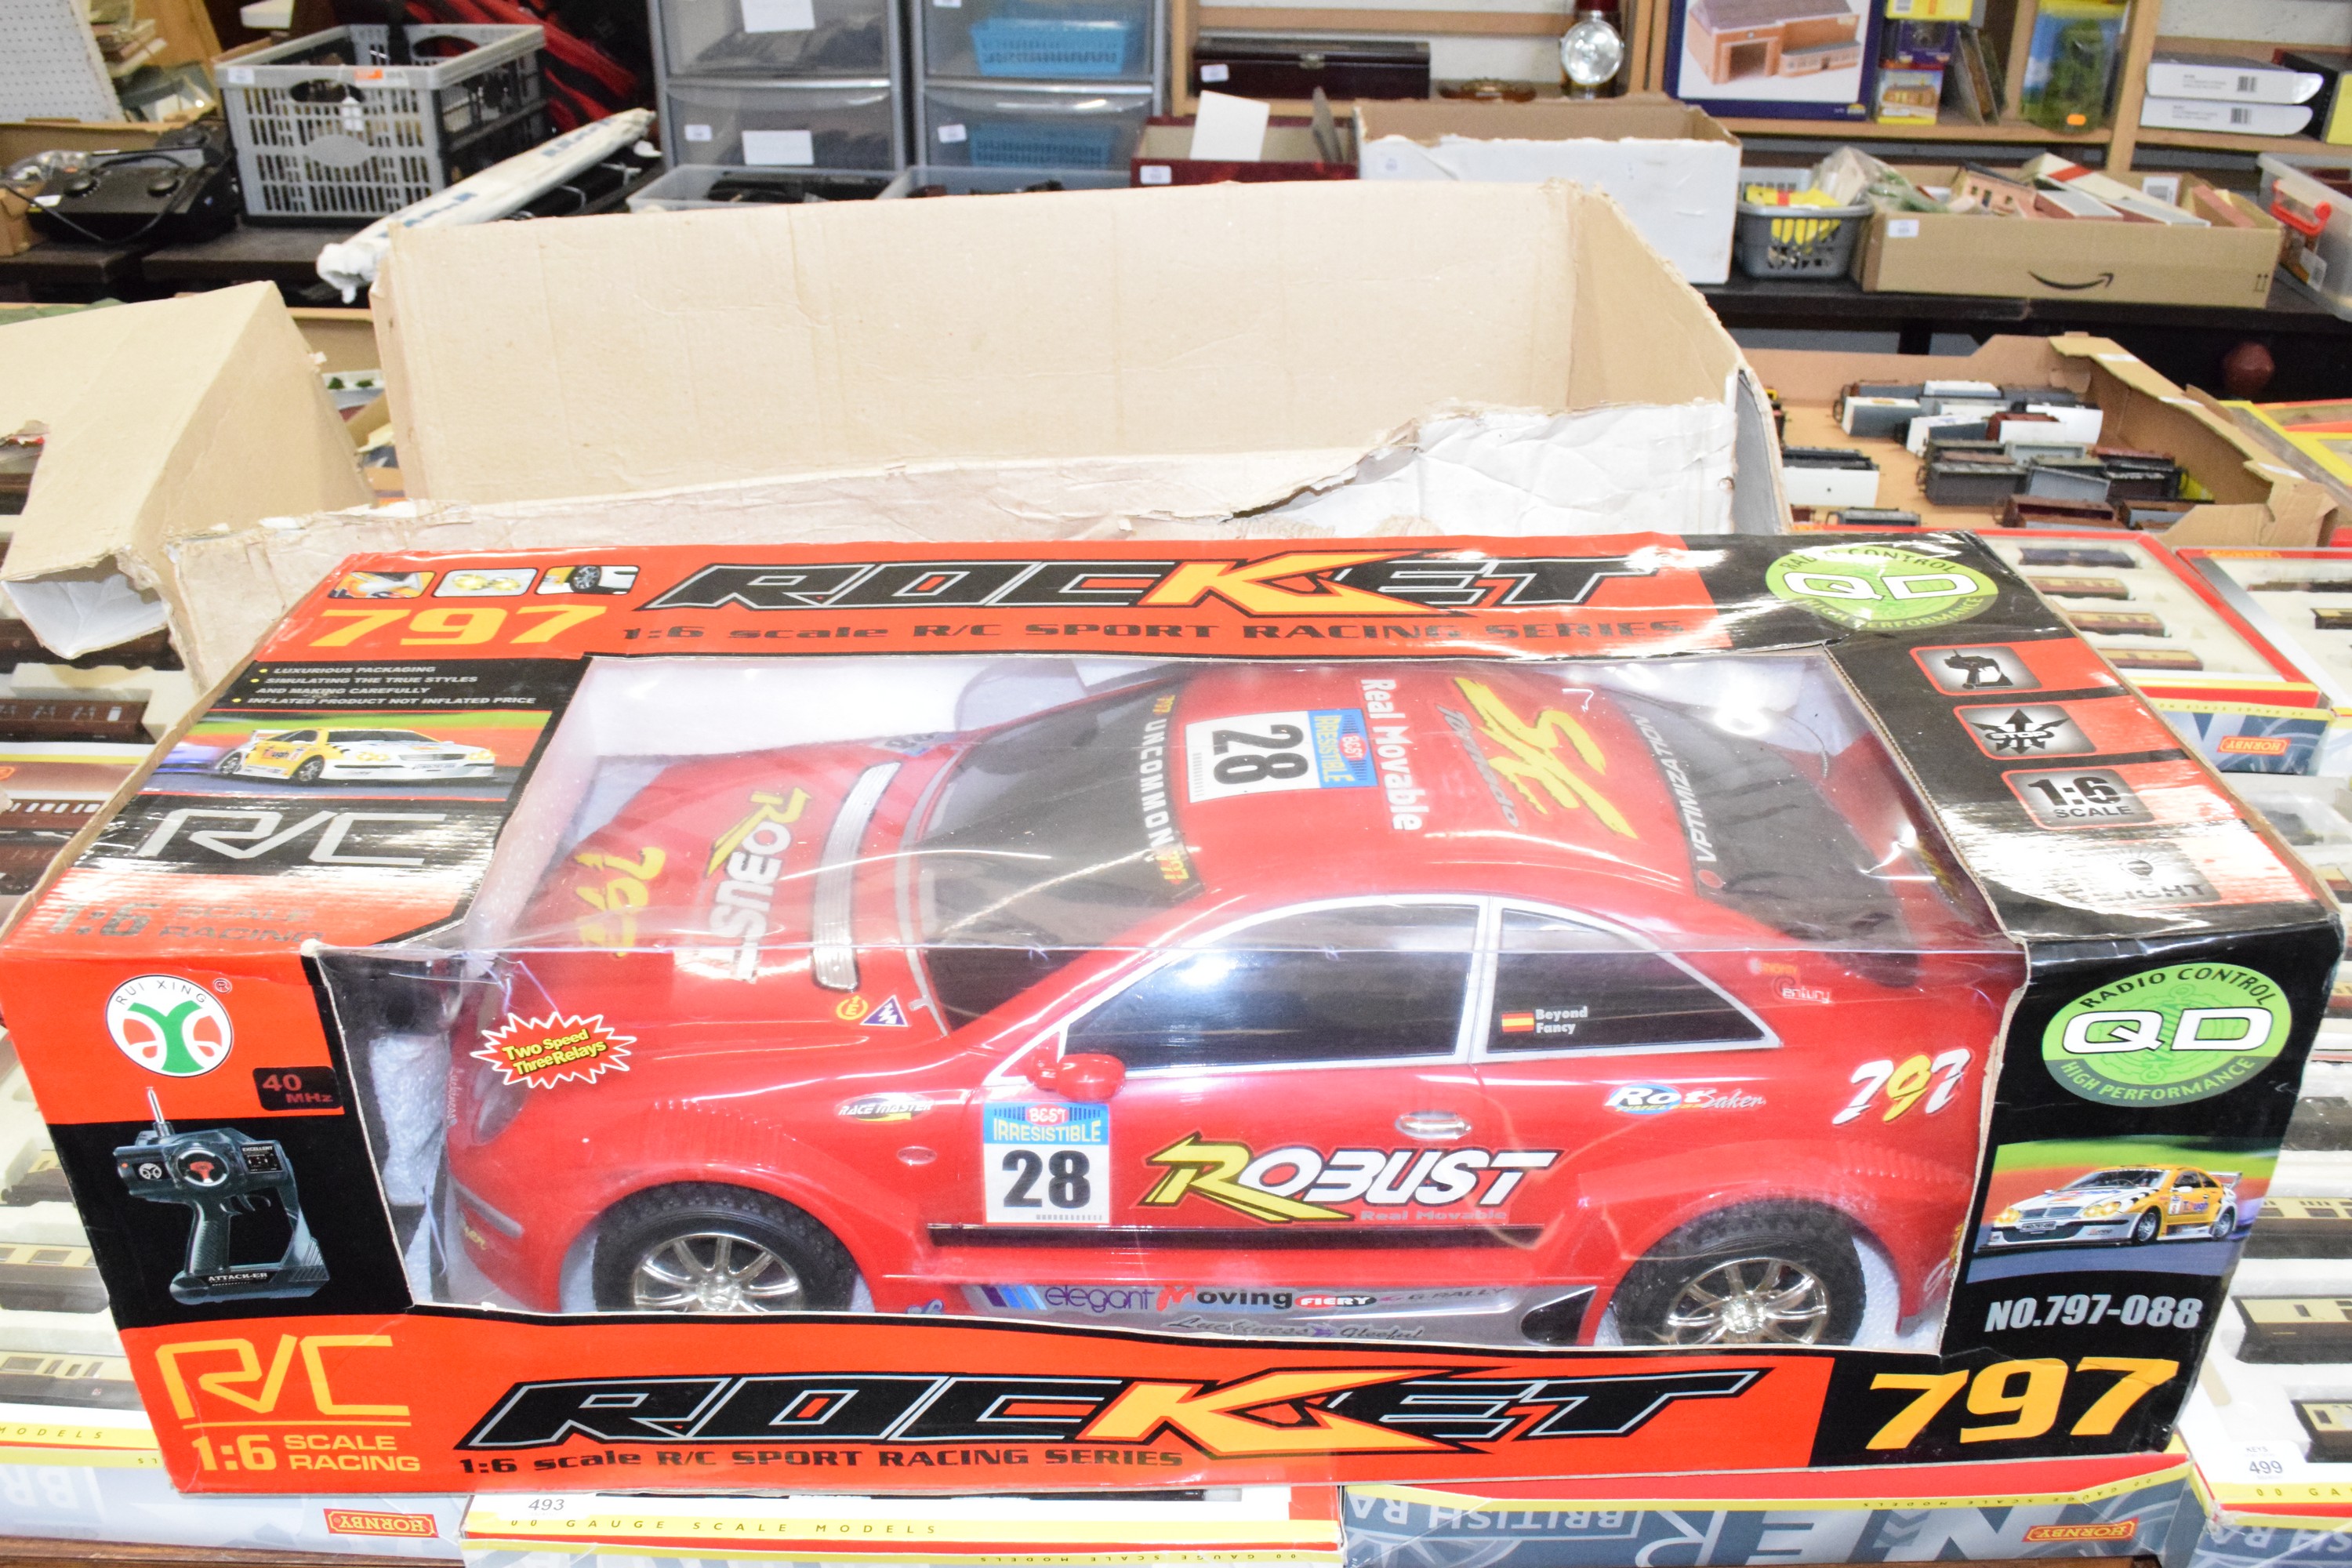 Boxed Rocket 126 scale RC sport racing car in red livery